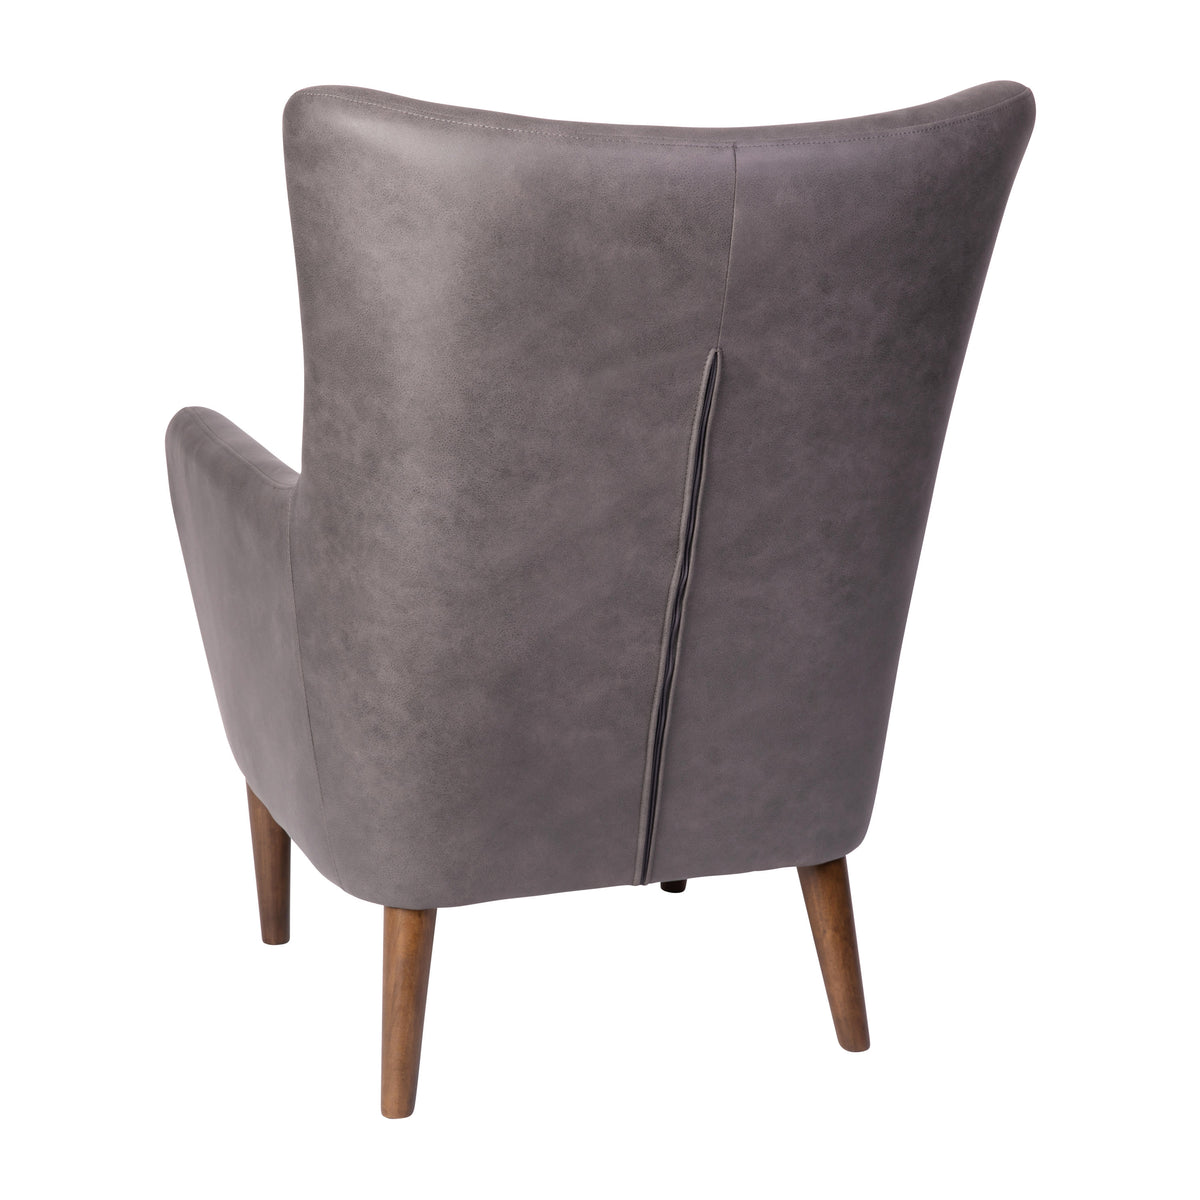 Dark Gray |#| Commercial Wingback Accent Chair with Wooden Legs in Dark Gray Faux Leather